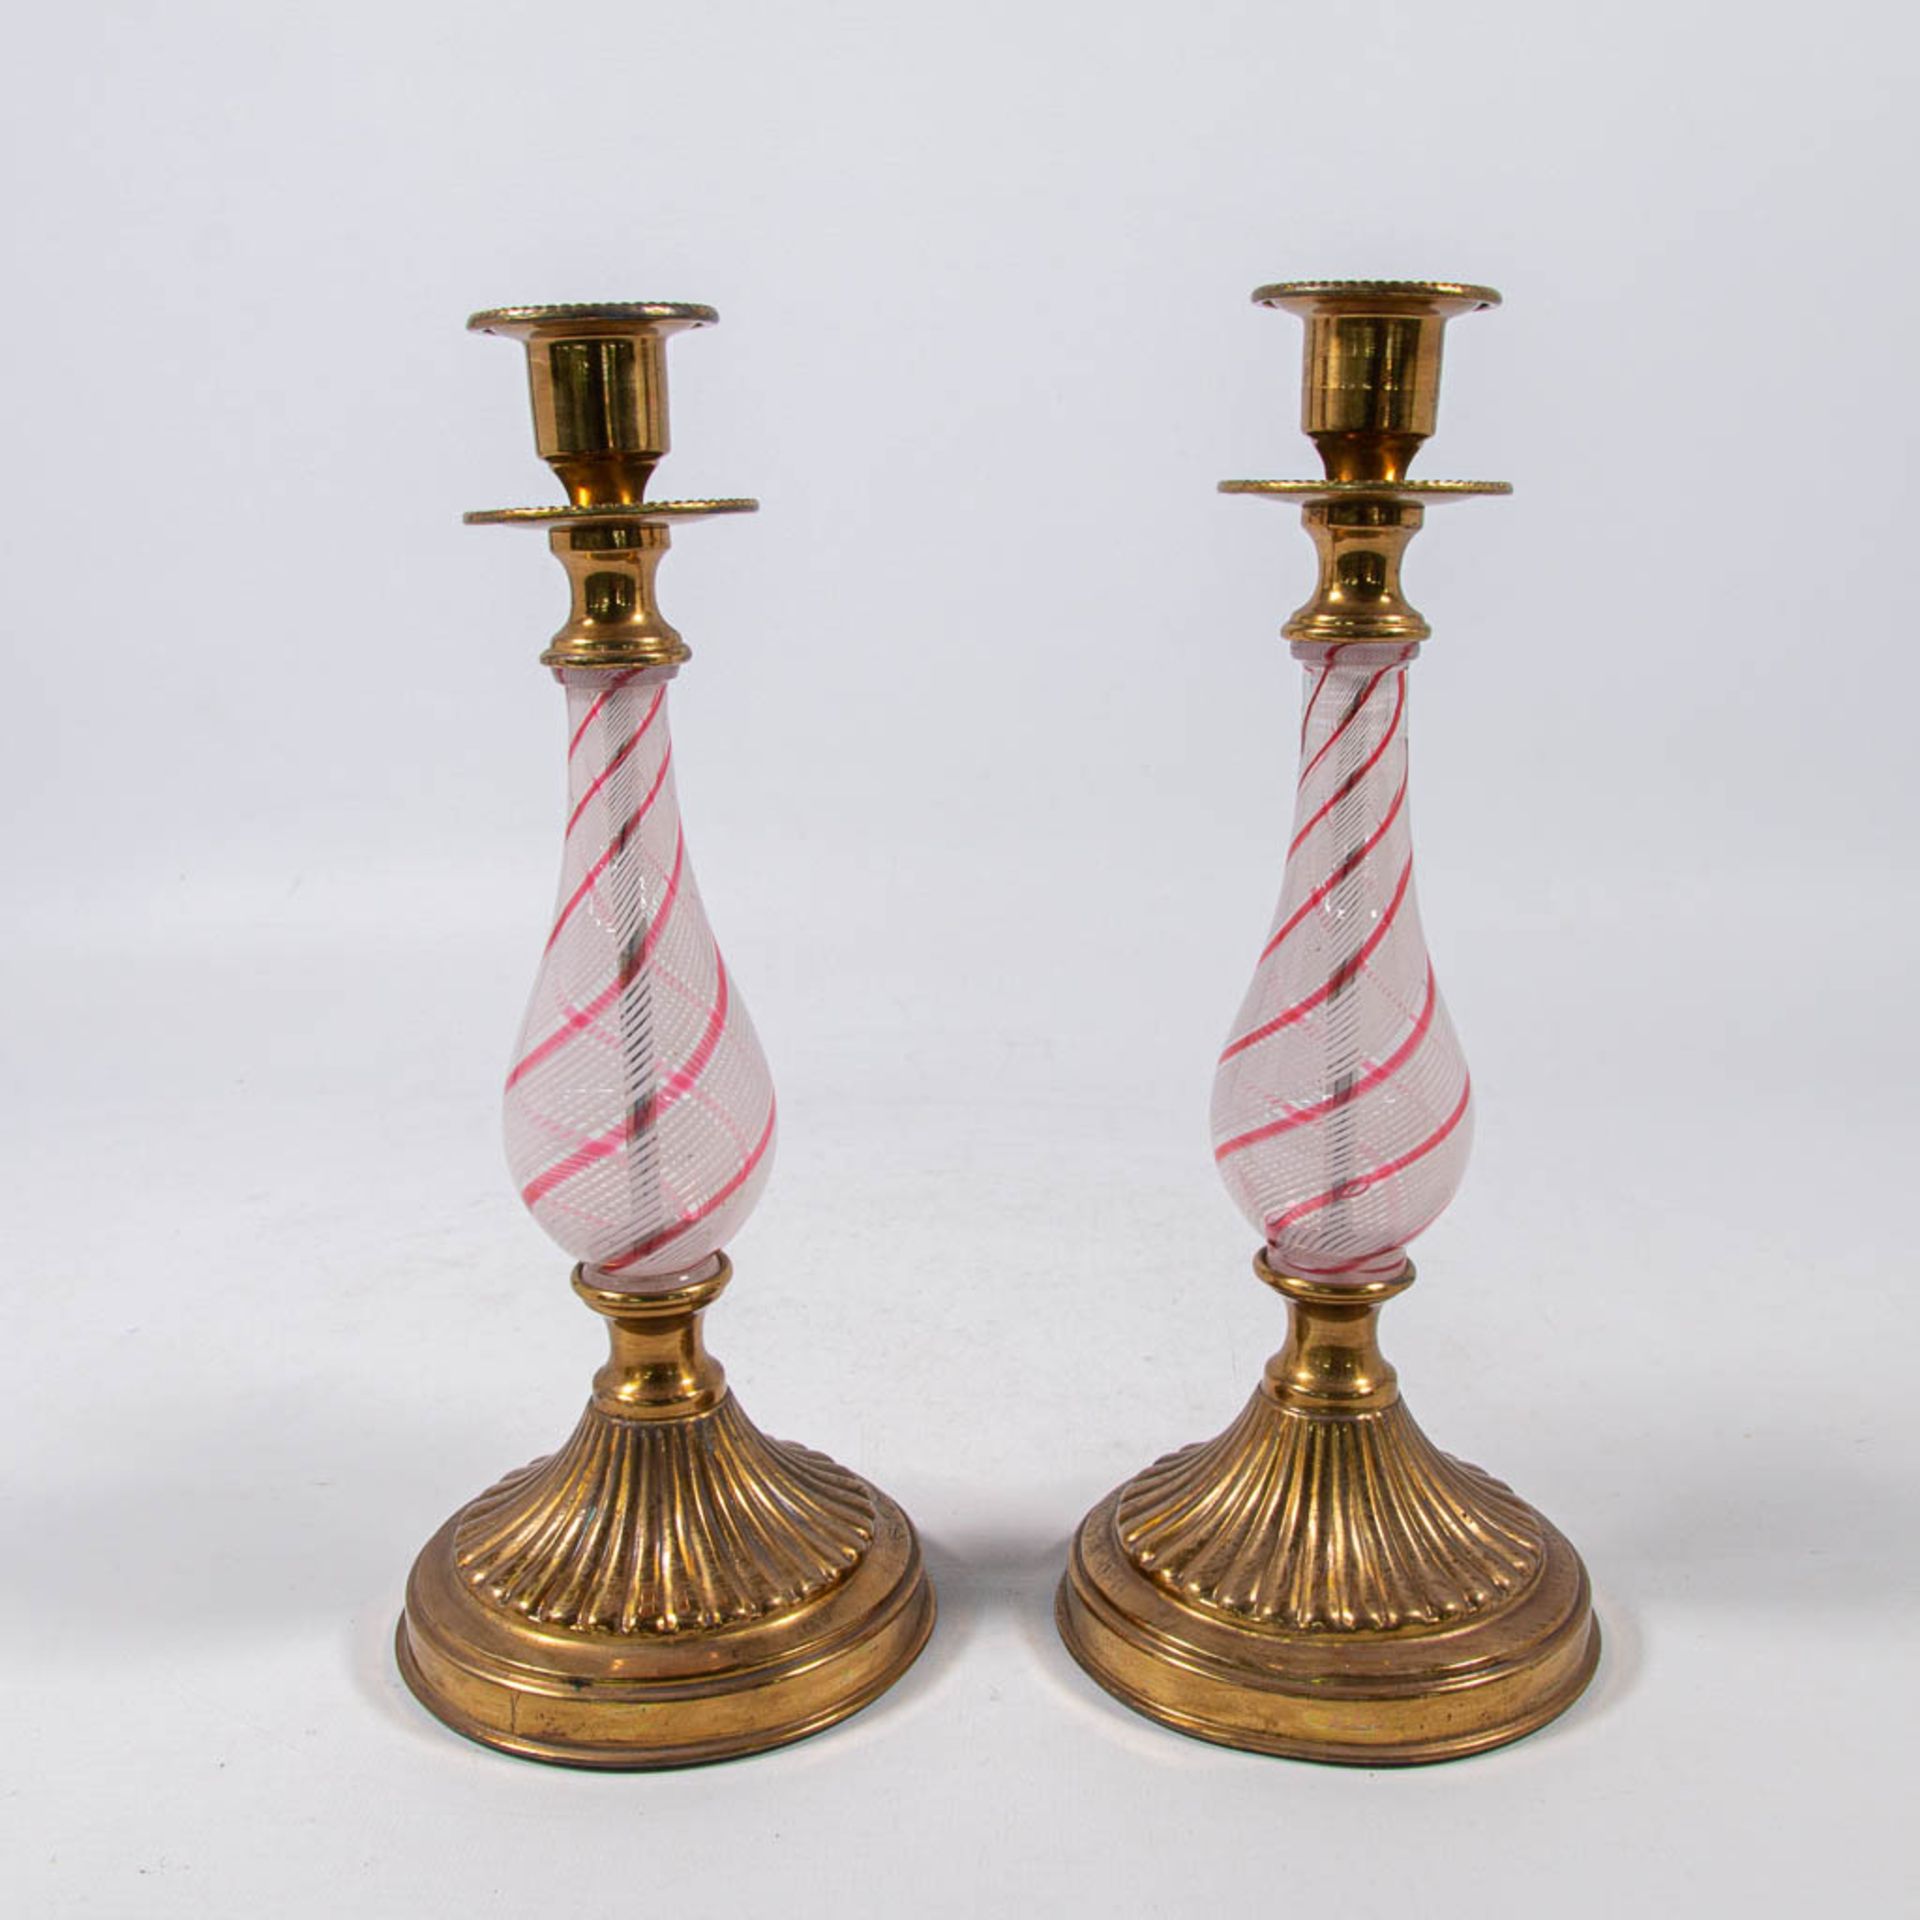 A pair of candlesticks, bronze mounted glass, made in Murano, Italy around 1920. (26 x 11 cm) - Image 2 of 12